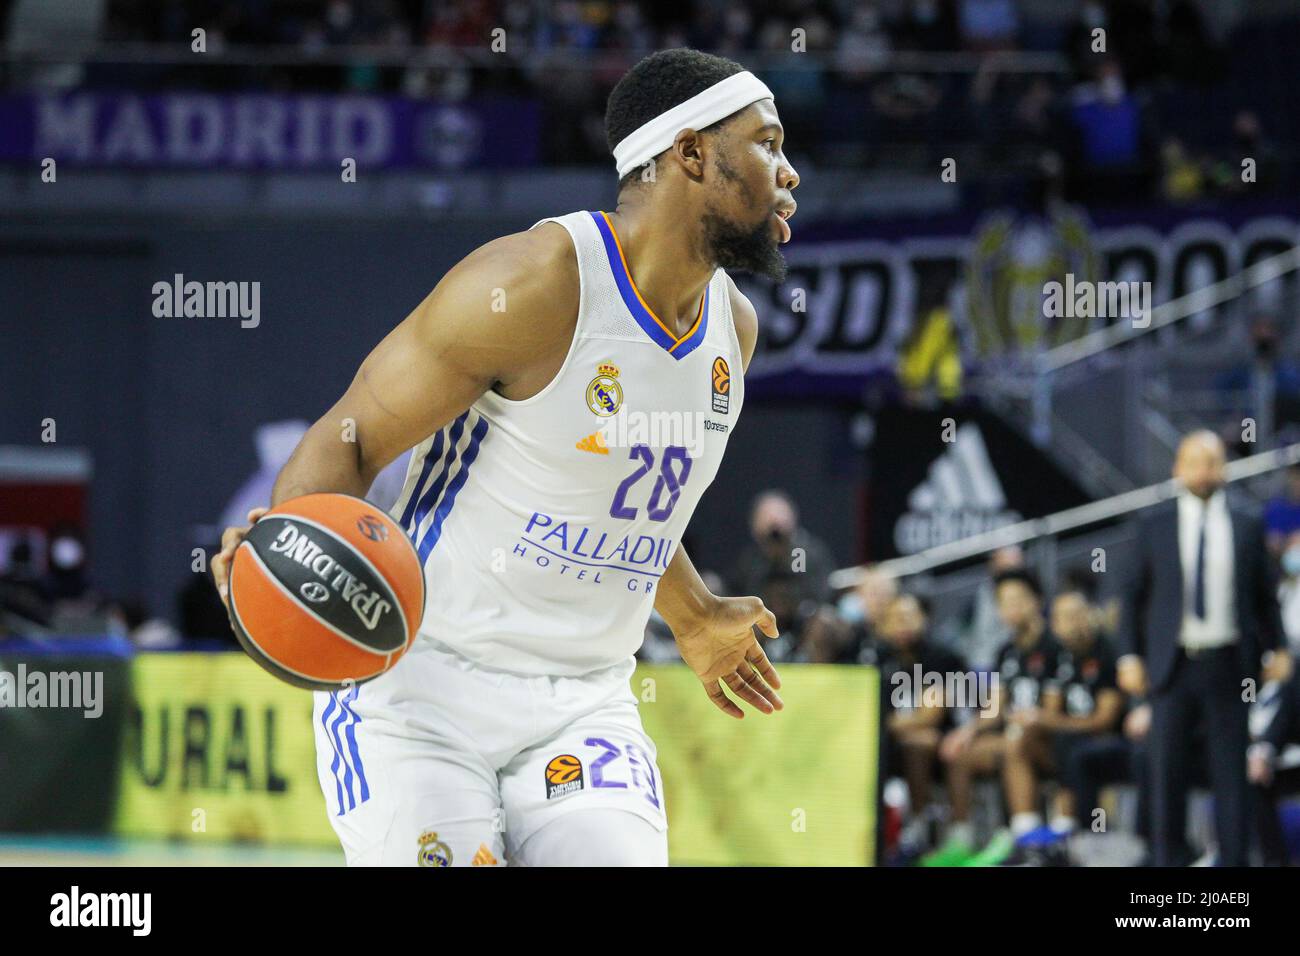 Madrid, Spain. 17th Mar, 2022. Guerschon Yabusele of Real Madrid during the Turkish Airlines Euroleague basketball match between Real Madrid and Asvel Lyon-Villeurbanne on march 17, 2022 at Wizink Center in Madrid, Spain Credit: Independent Photo Agency/Alamy Live Newss Stock Photo